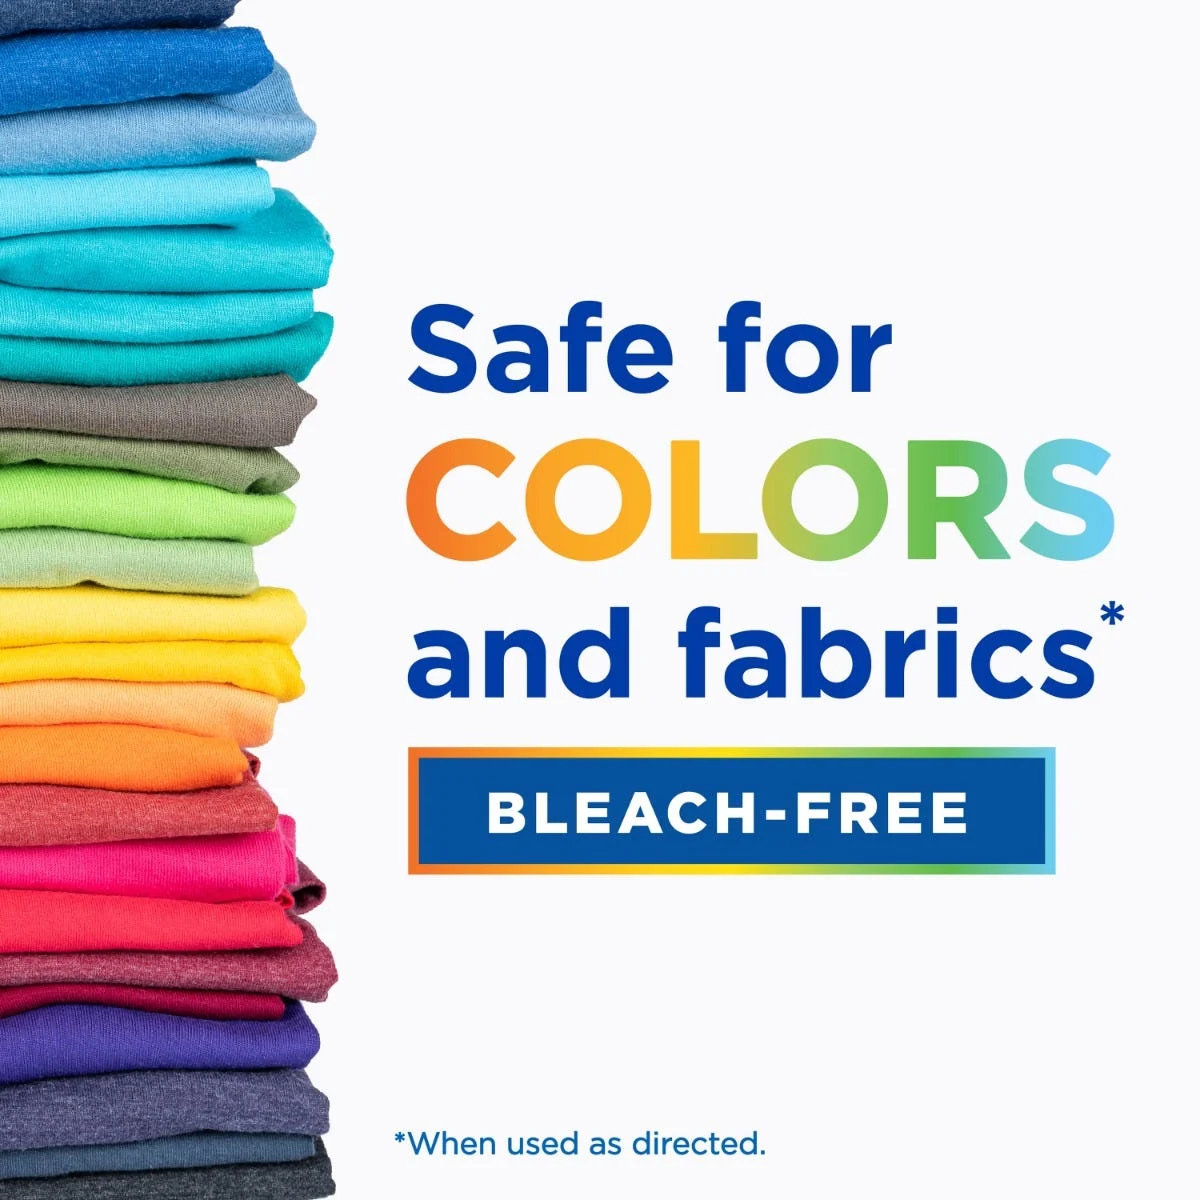 bleach-free, safe for colors & fabrics when used as directed